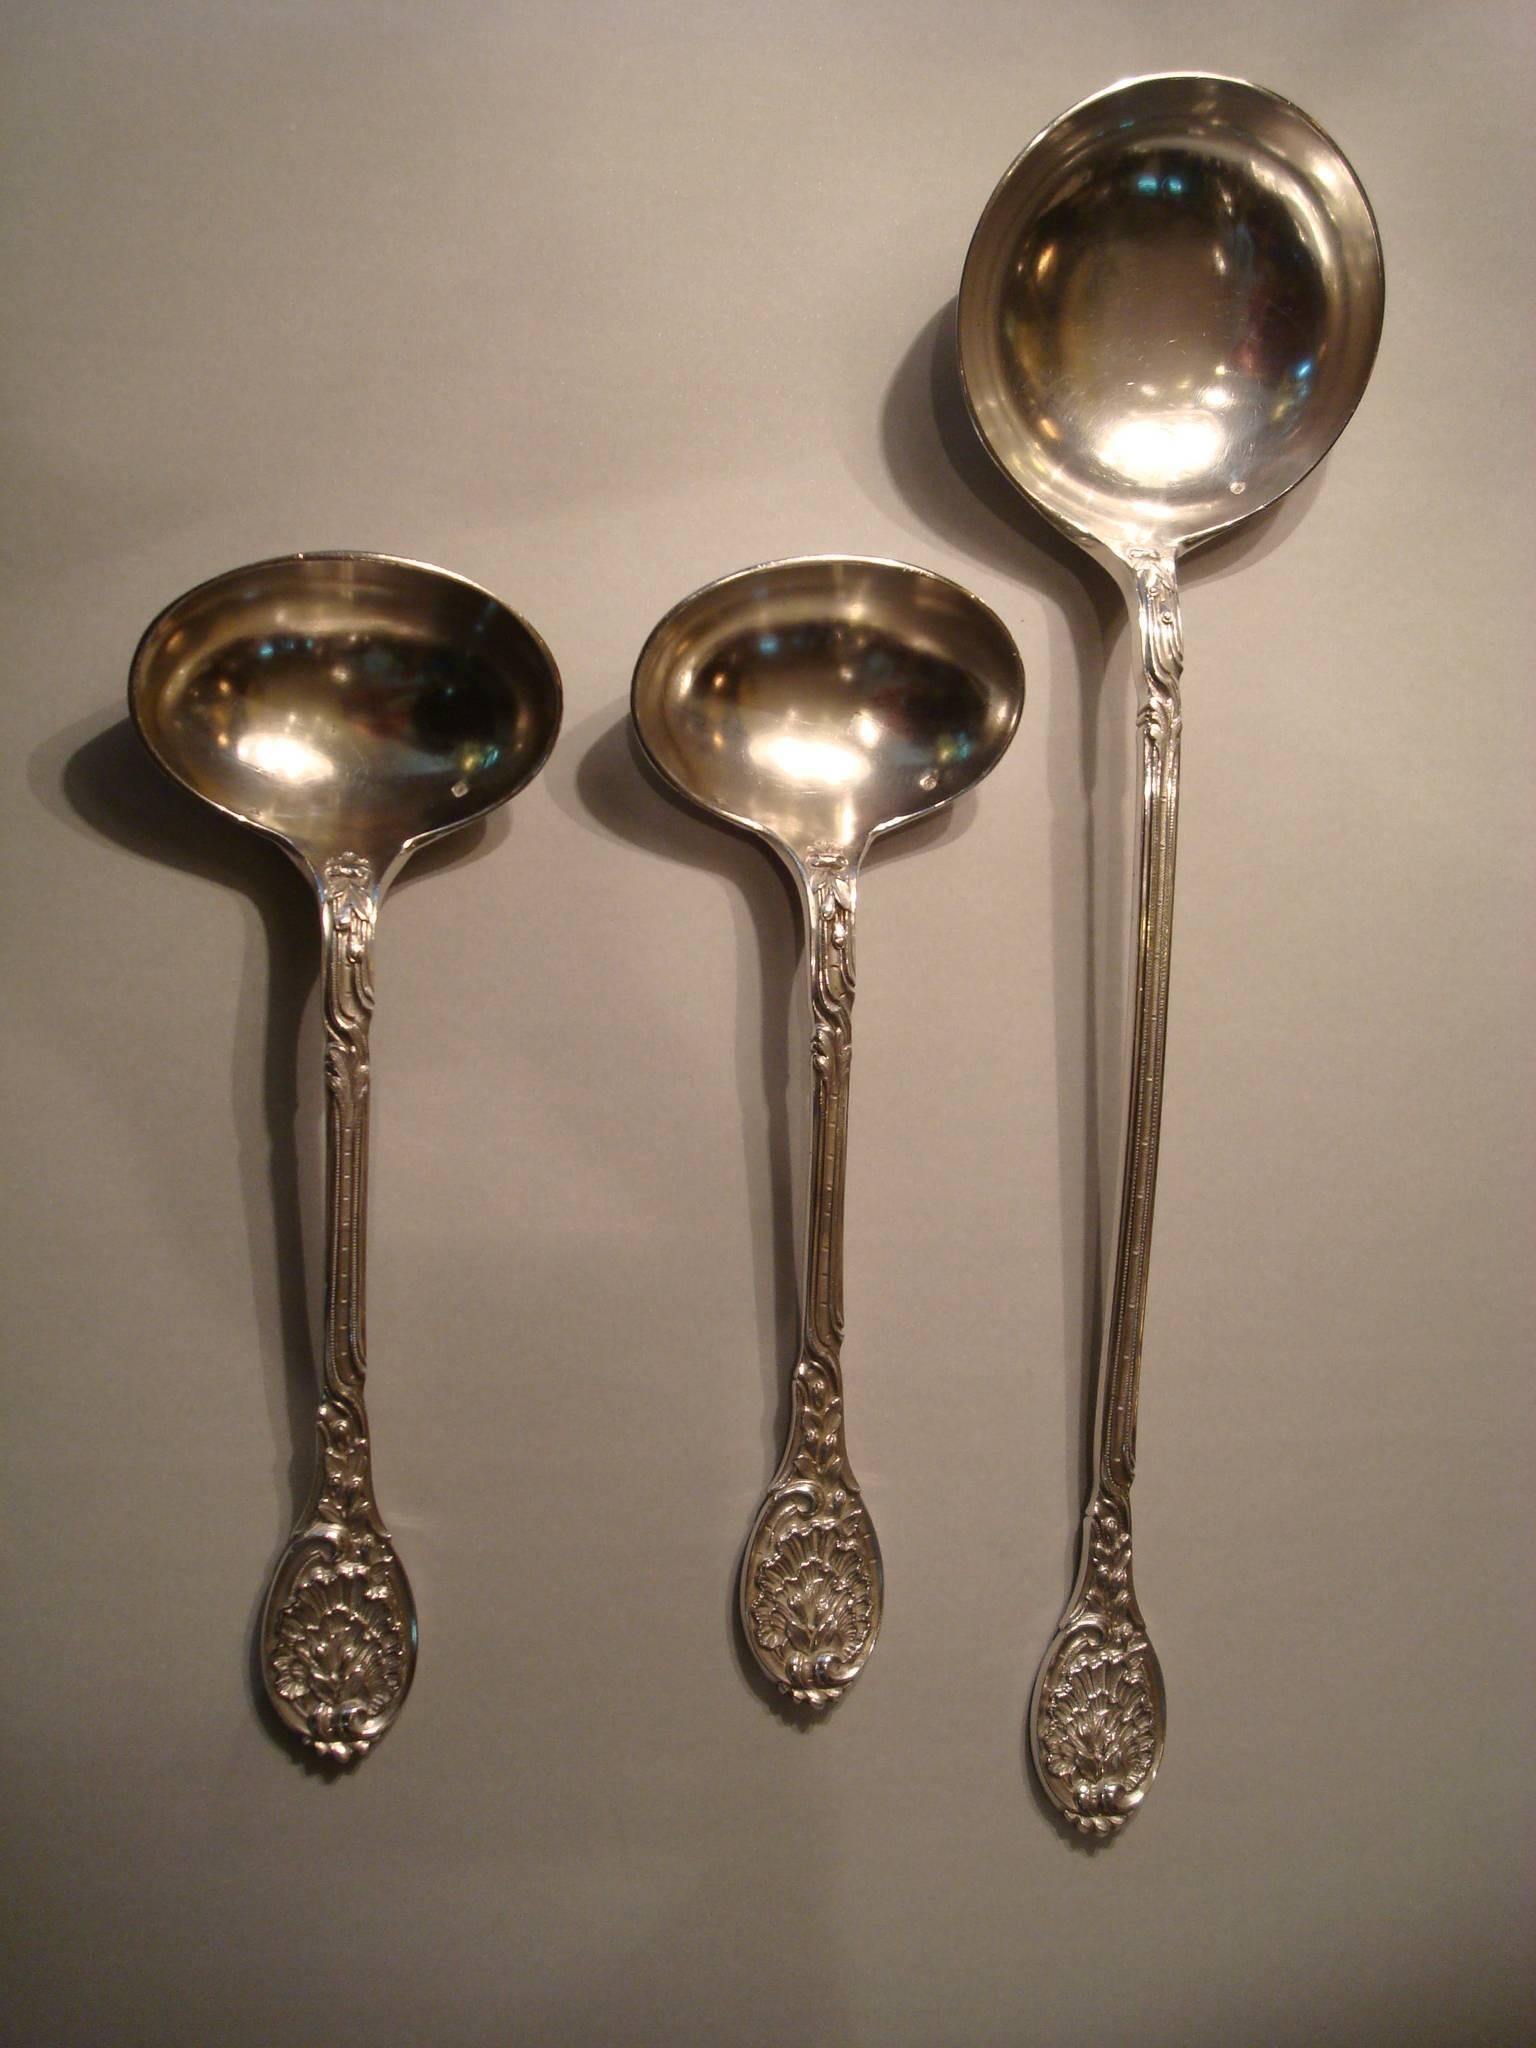 20th Century Rococo Odiot Meissonnier Sterling Silver Cutlery Flatware for 12, France